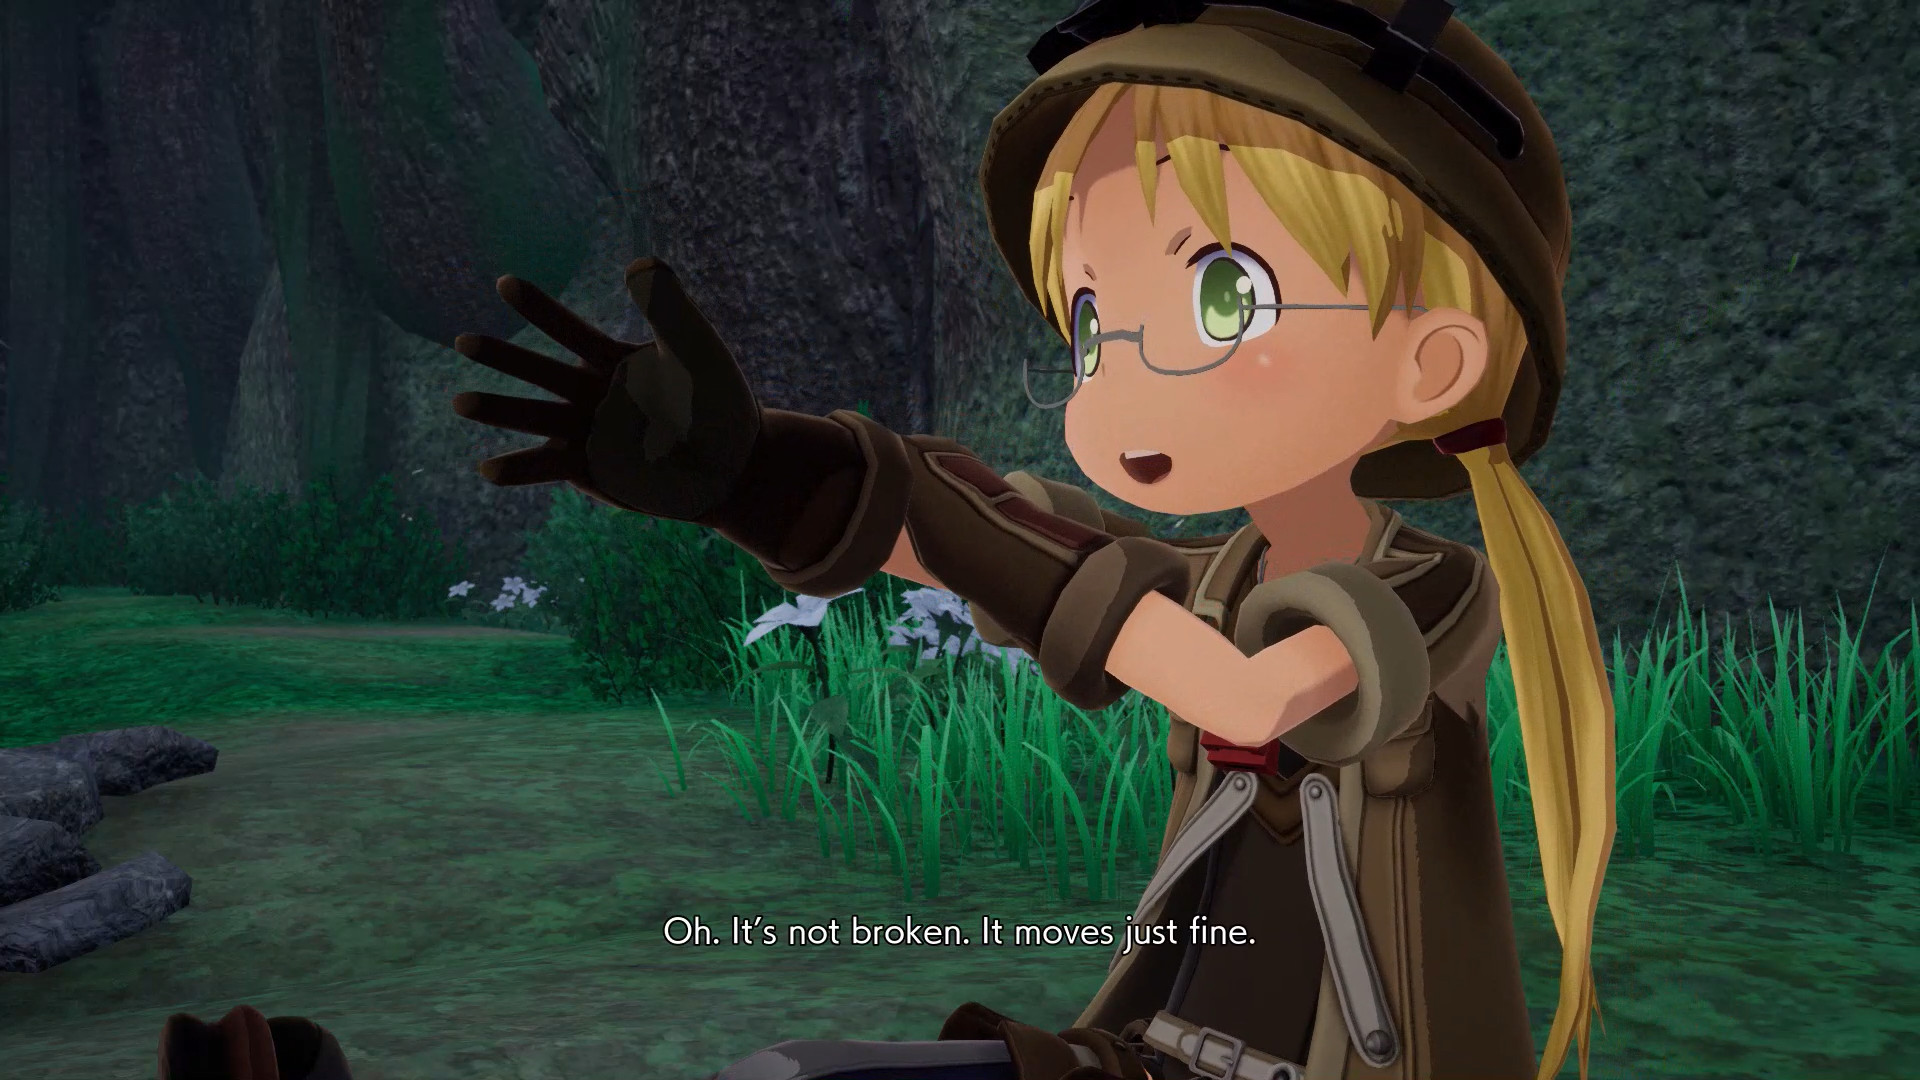 Anime Review: Made in Abyss